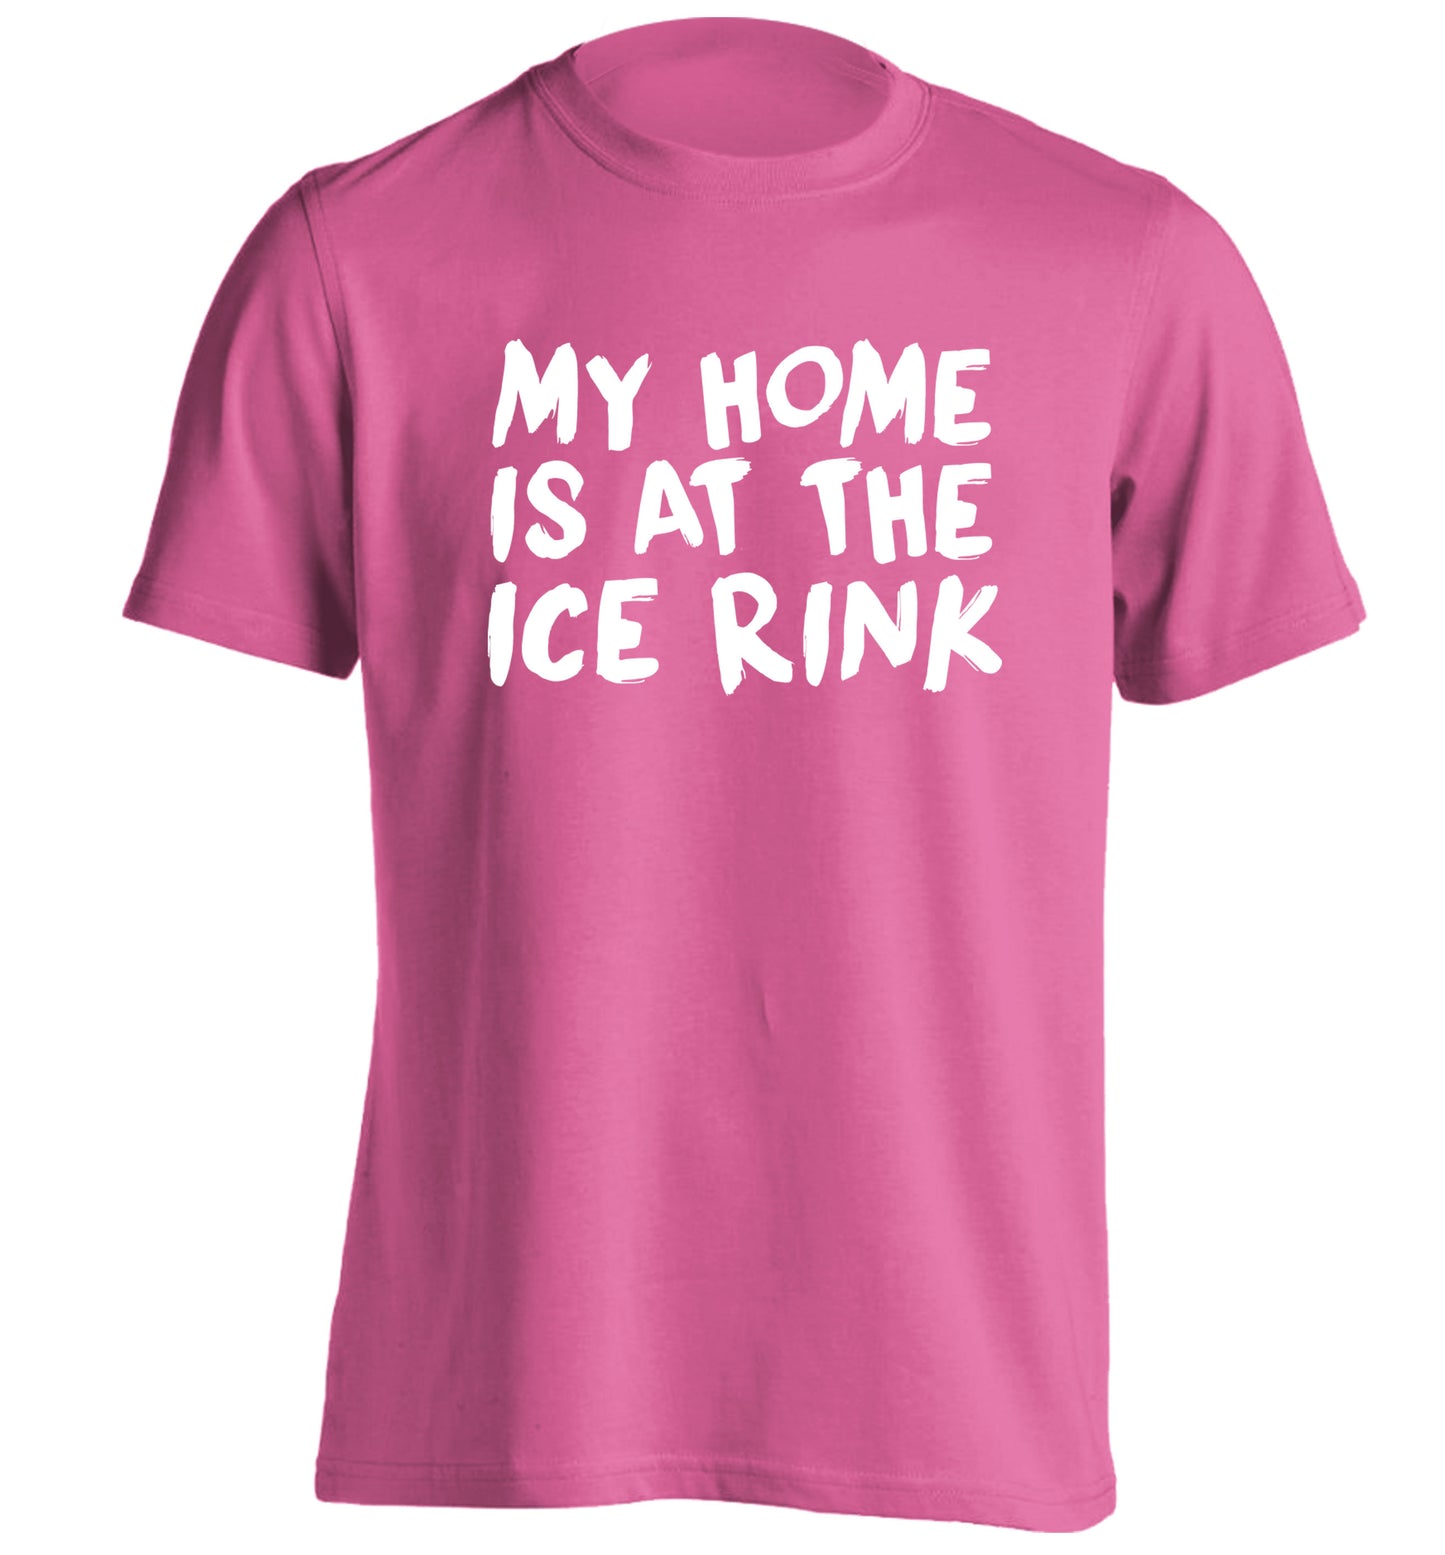 My home is at the ice rink adults unisex pink Tshirt 2XL